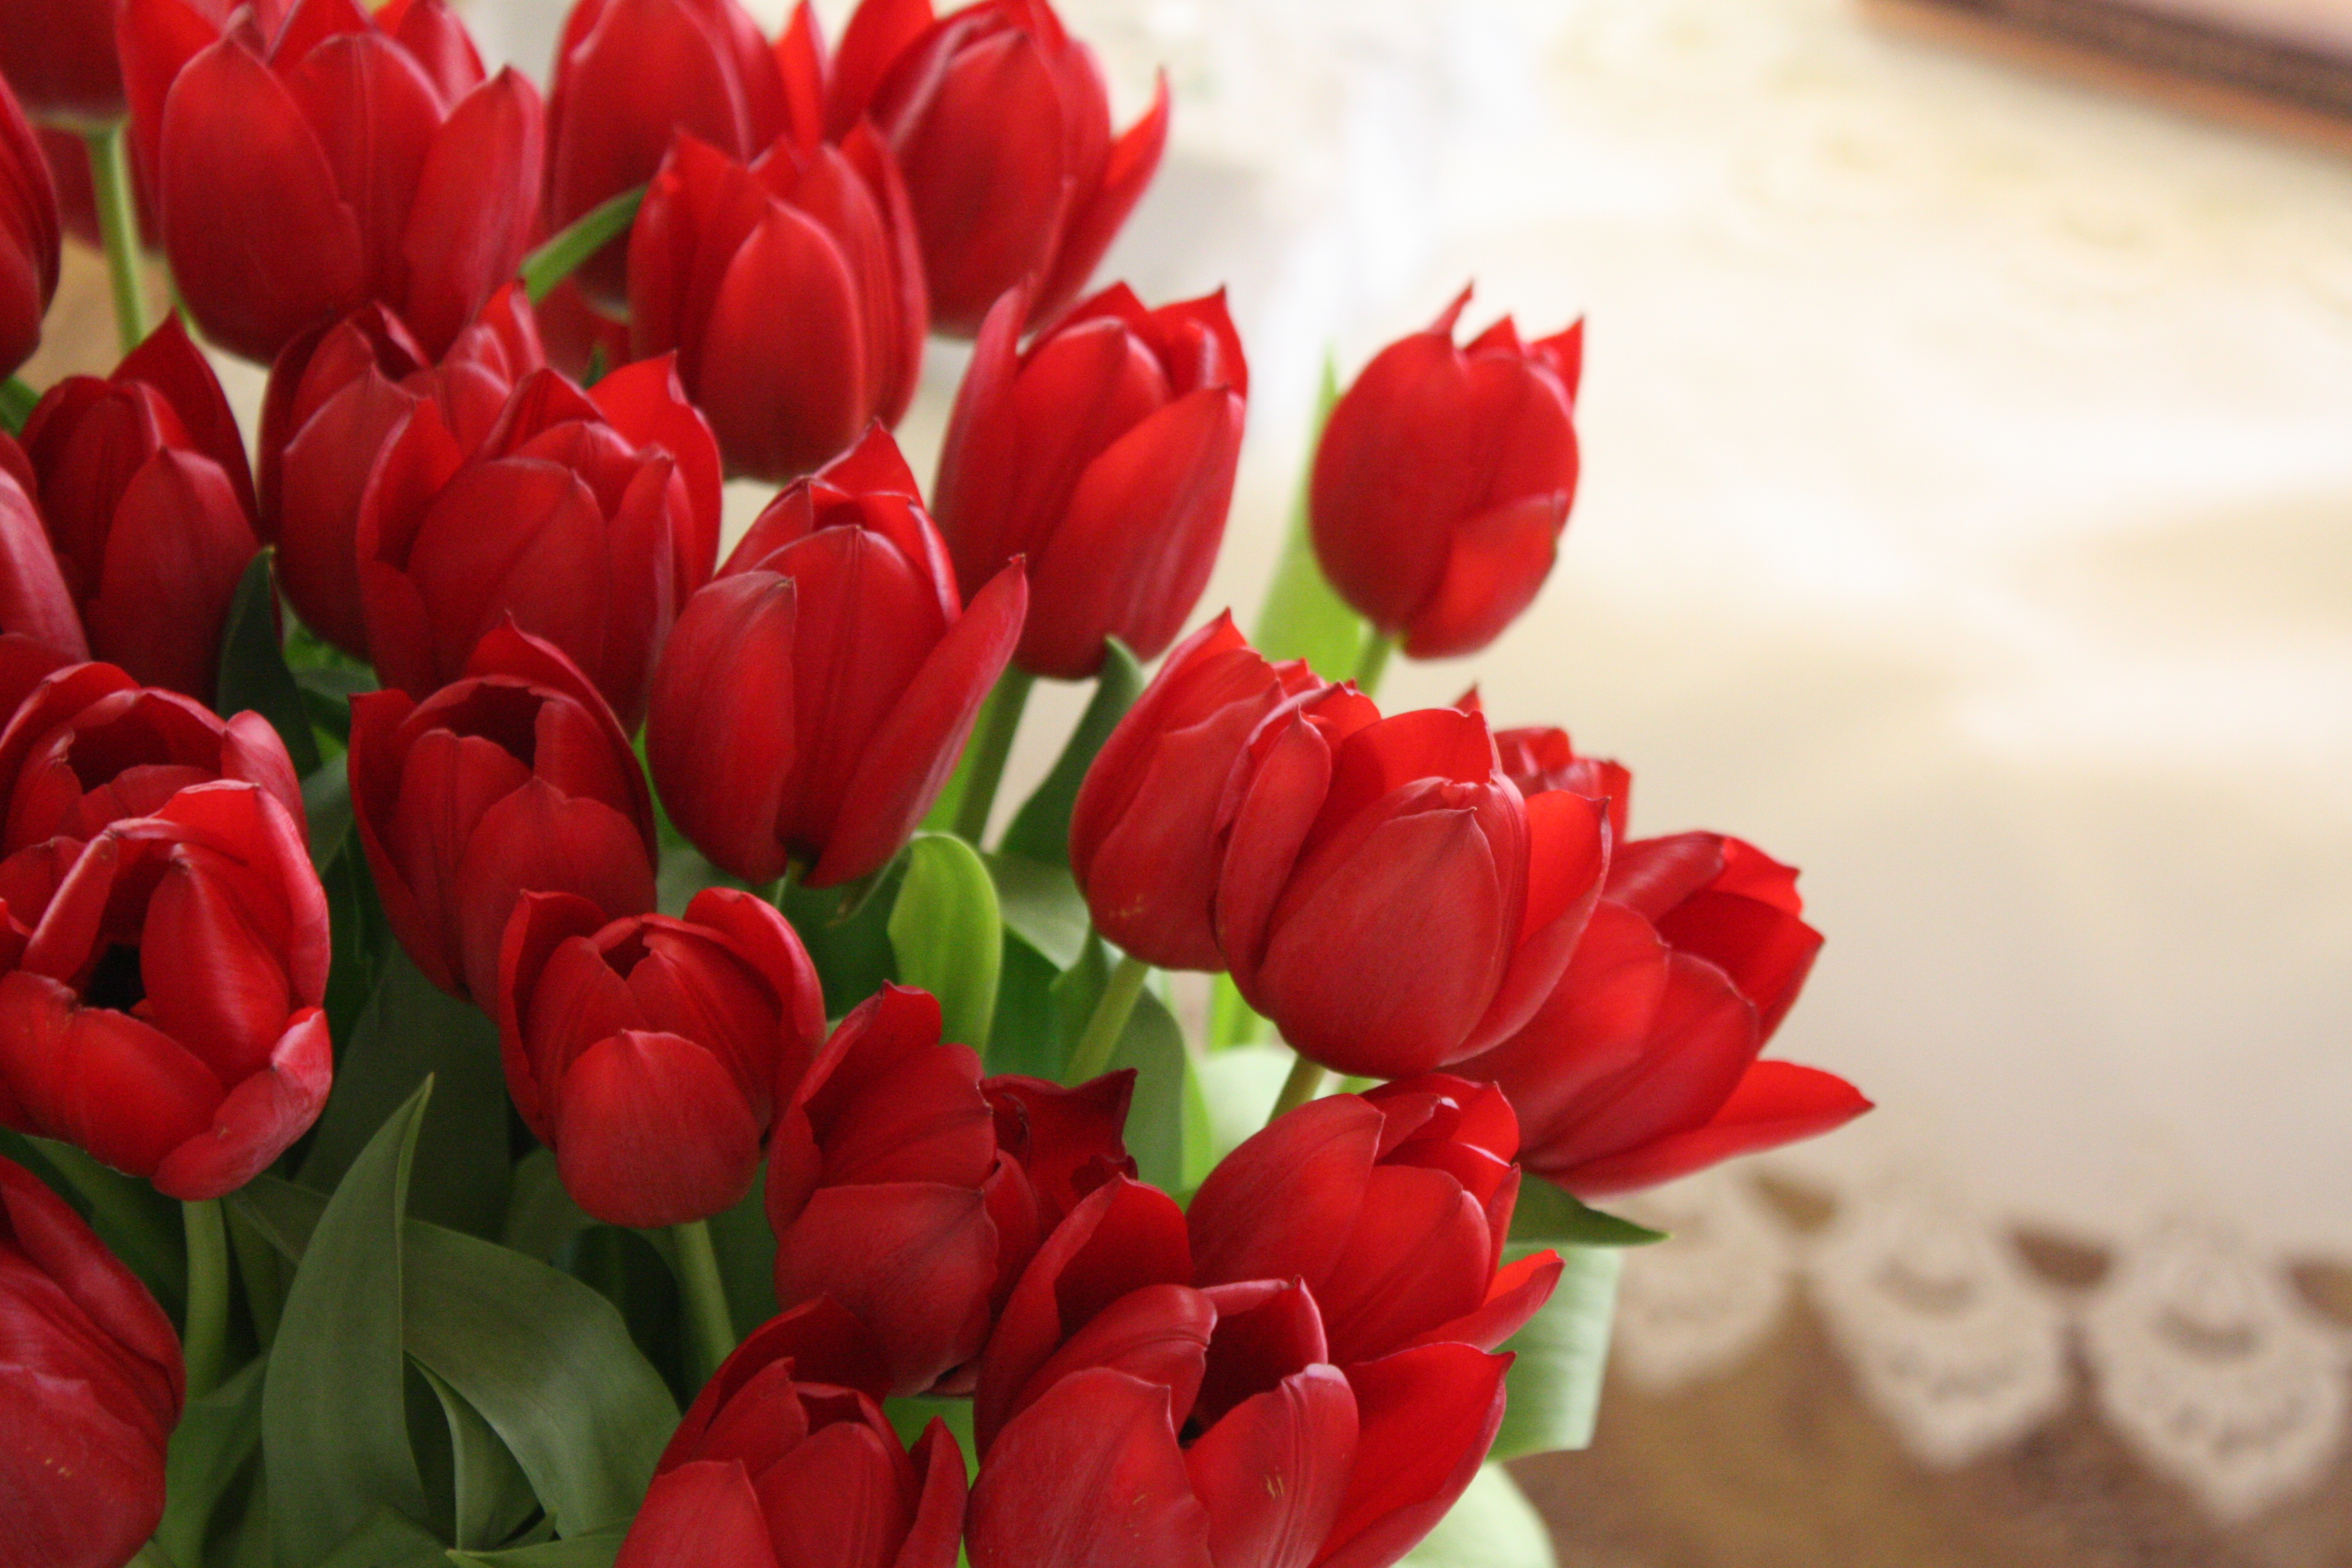 flowers, tulips, red, bouquet, handsomely, it's beautiful